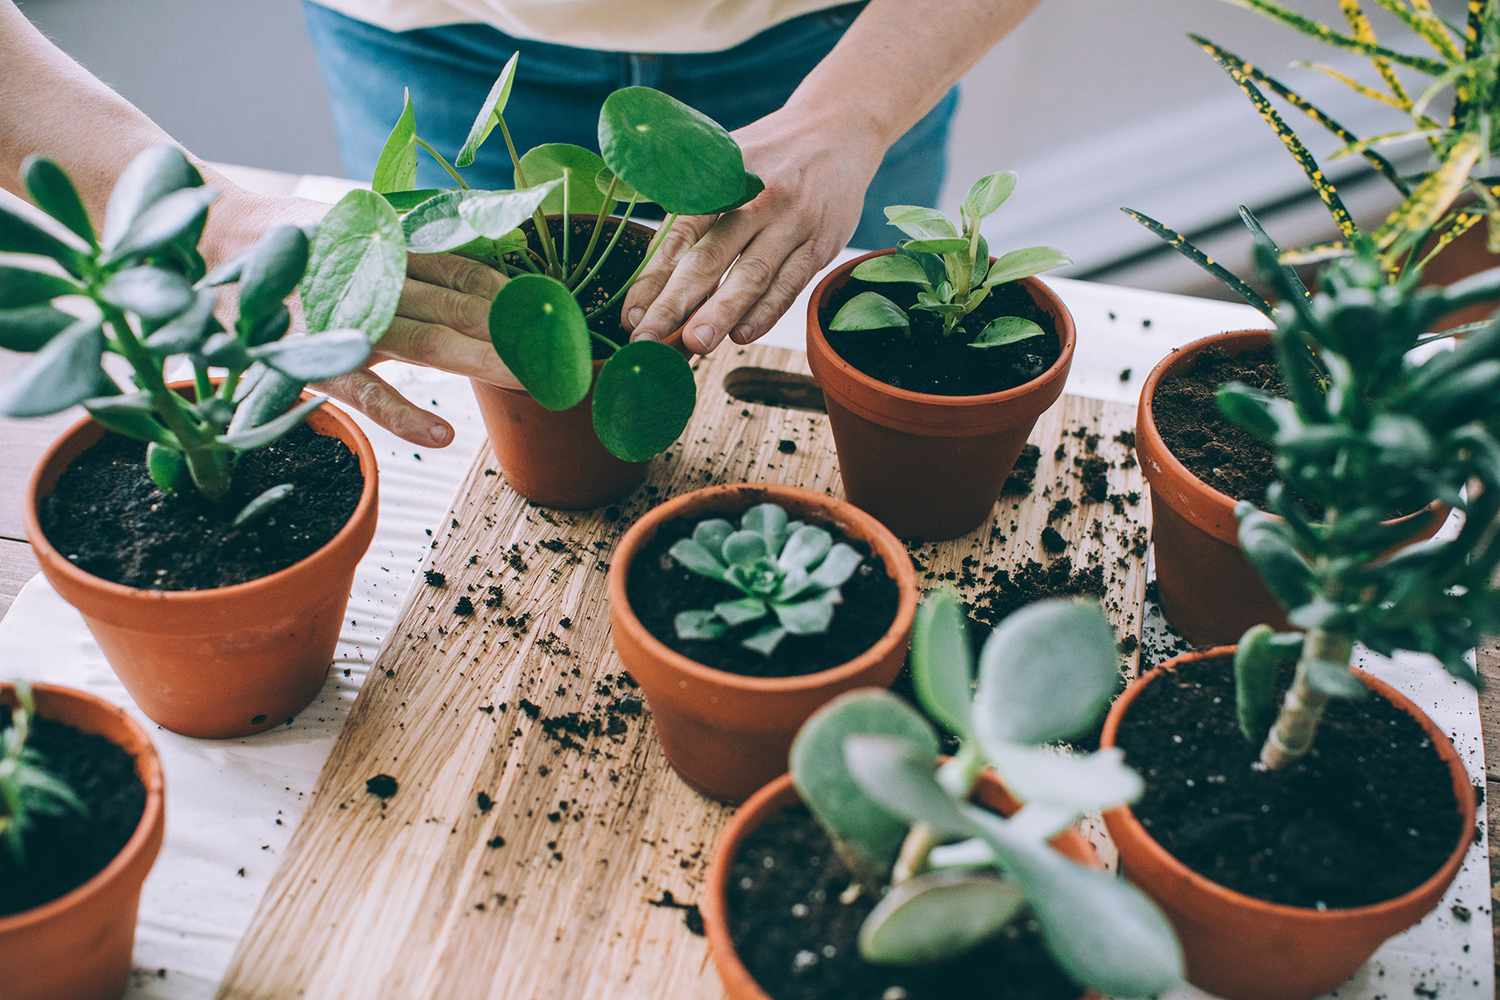 A woman is putting plants in pots on a table.